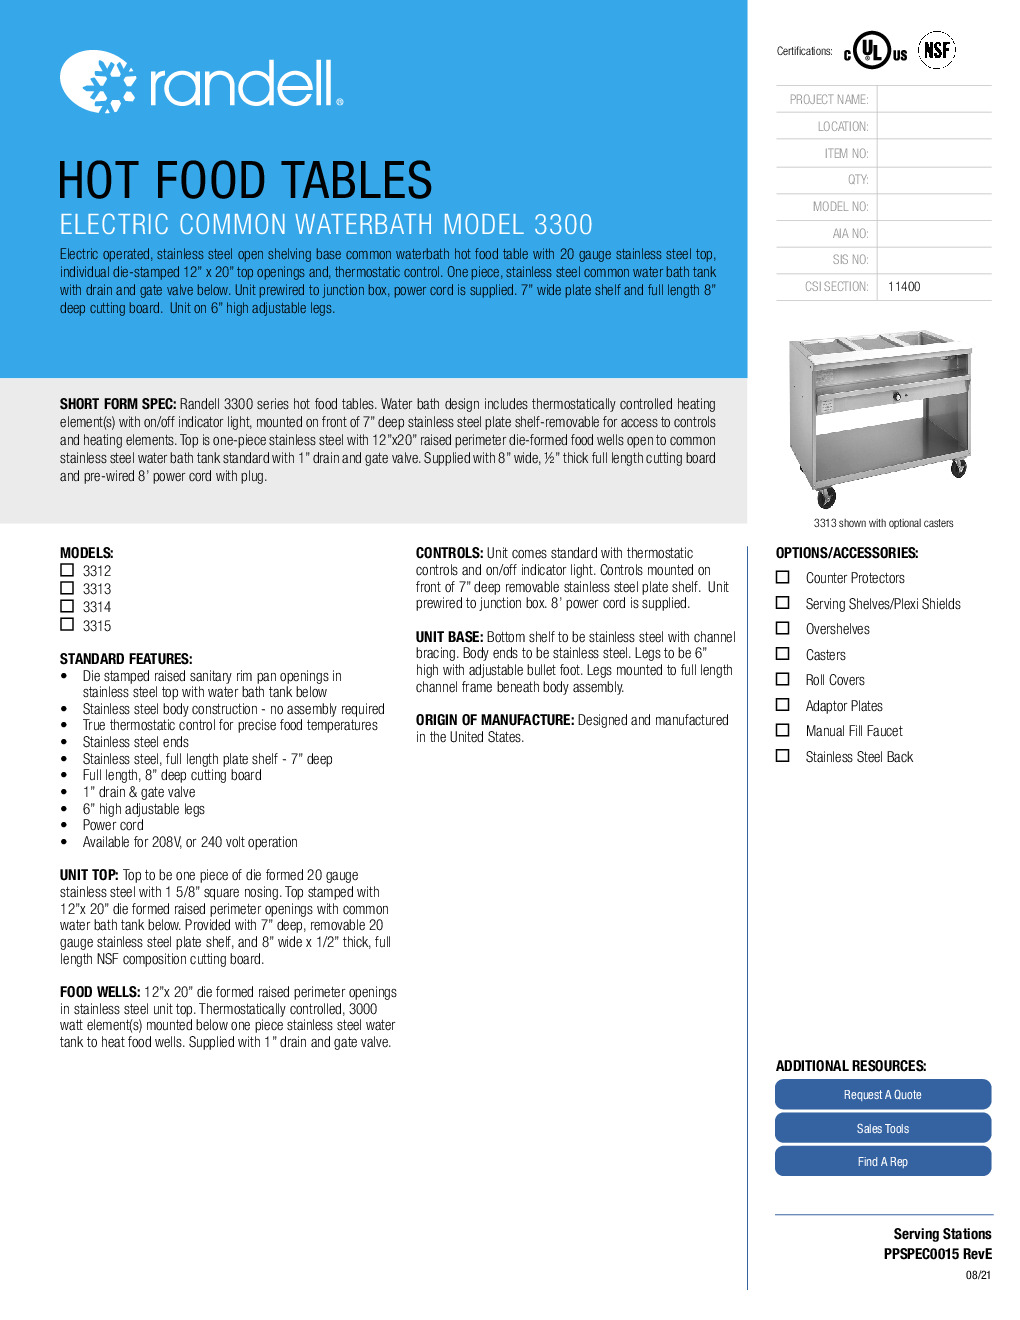 Randell 3315-240 Electric Hot Food Serving Counter